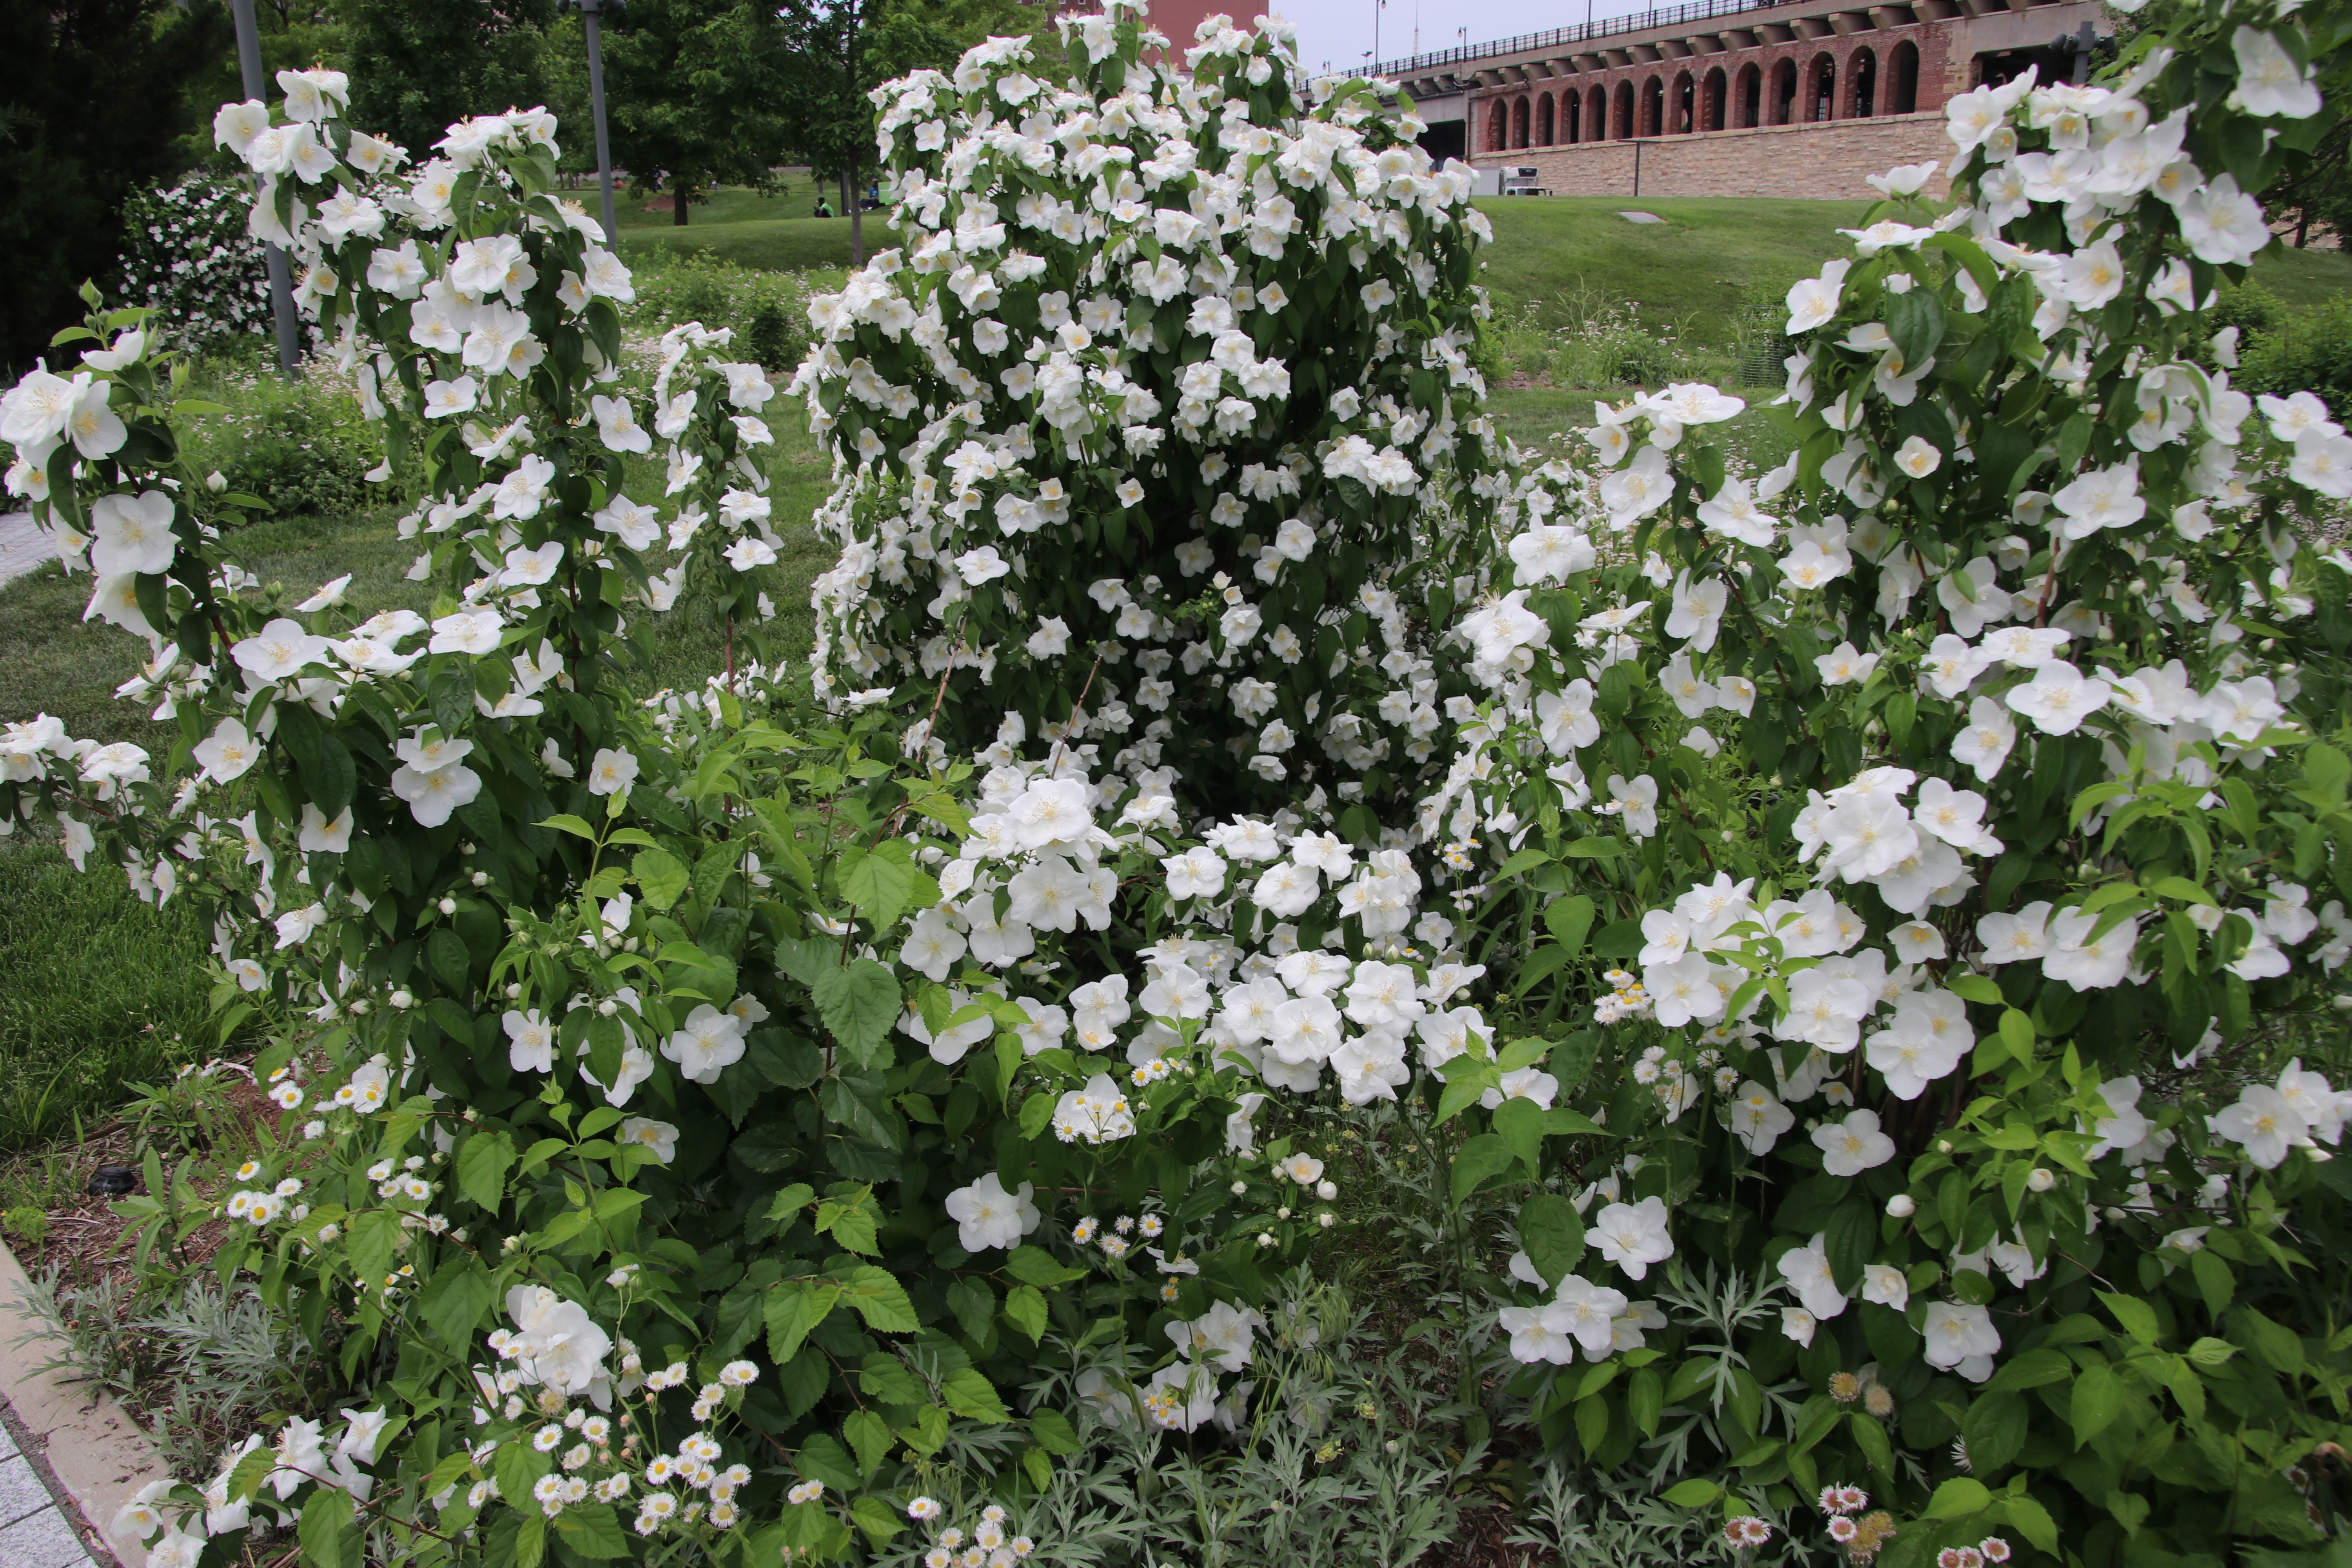 Several small bushes covered in very large, showy white flowers